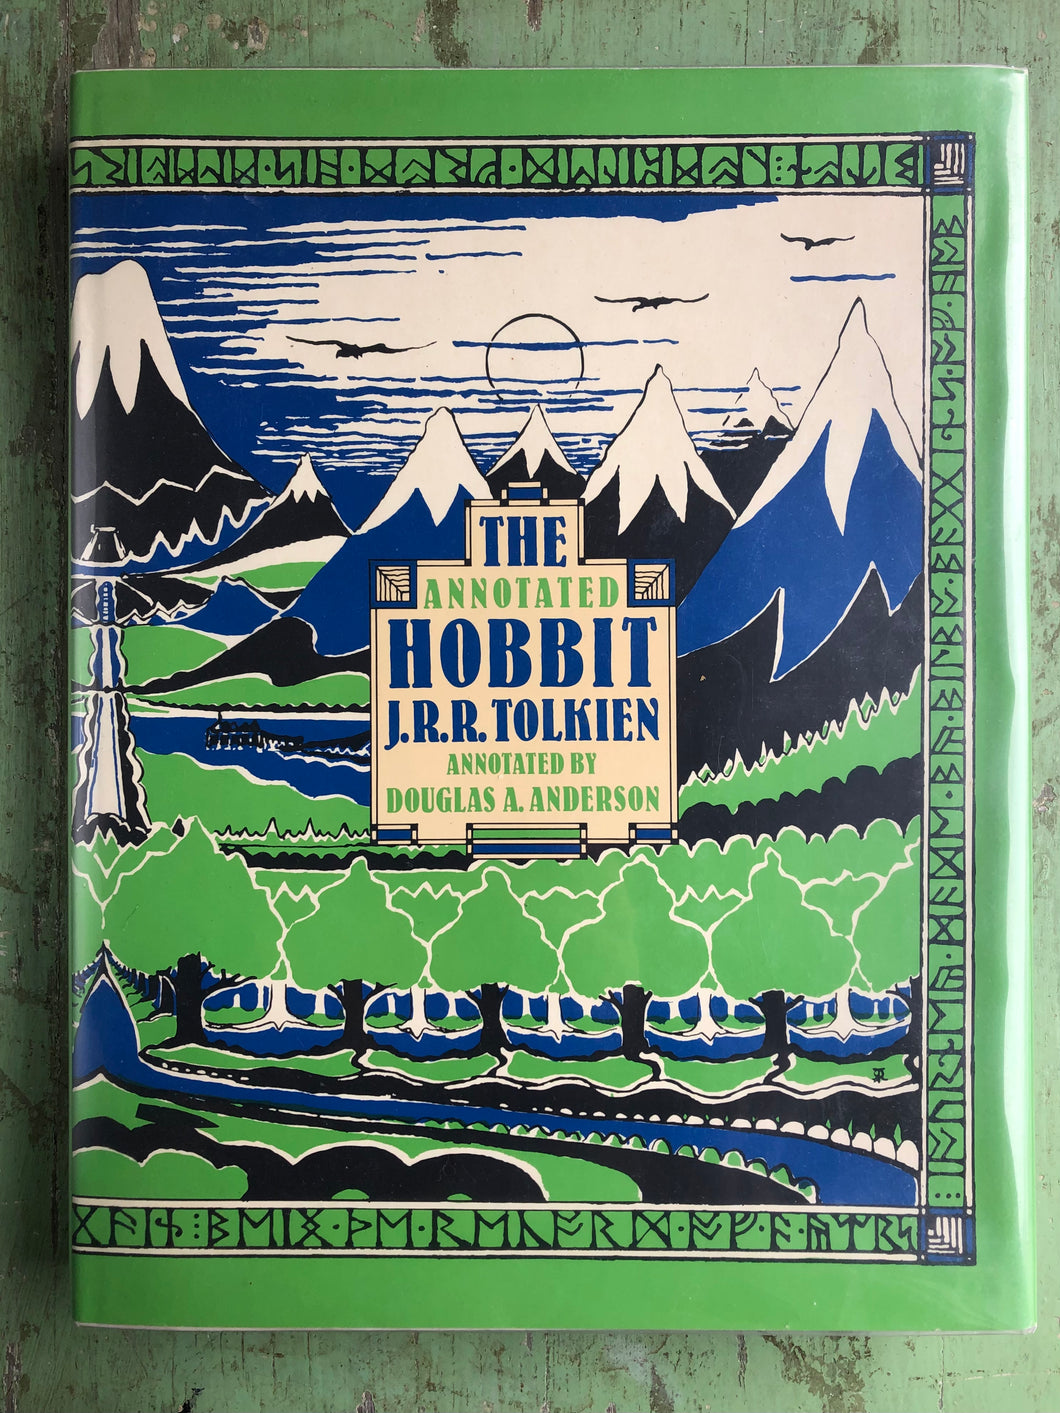 The Annotated Hobbit: The Hobbit or There and Back Again by J. R. R. Tolkien. Introduction and notes by Douglas A. Anderson